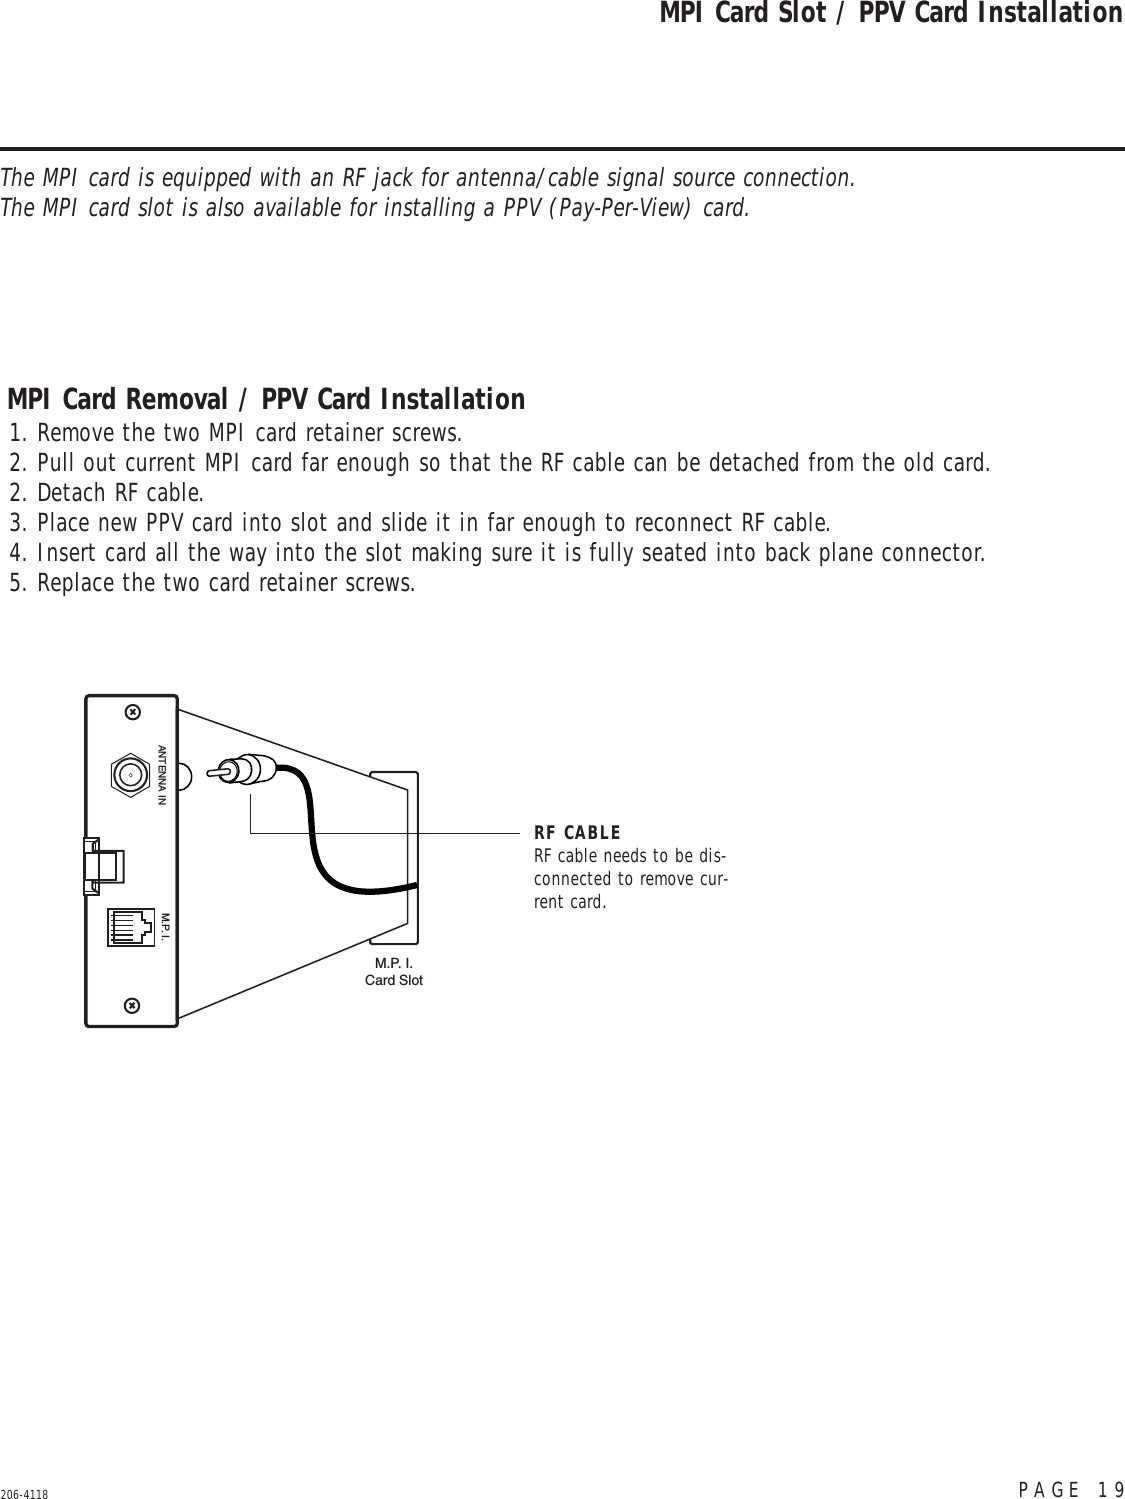 PAGE 19206-4118MPI Card Slot / PPV Card InstallationDC INANTENNA IN M.P. I.M.P. I.Card SlotRF CABLERF cable needs to be dis-connected to remove cur-rent card.MPI Card Removal / PPV Card Installation1. Remove the two MPI card retainer screws.2. Pull out current MPI card far enough so that the RF cable can be detached from the old card.2. Detach RF cable.3. Place new PPV card into slot and slide it in far enough to reconnect RF cable.4. Insert card all the way into the slot making sure it is fully seated into back plane connector.5. Replace the two card retainer screws.The MPI card is equipped with an RF jack for antenna/cable signal source connection. The MPI card slot is also available for installing a PPV (Pay-Per-View) card.